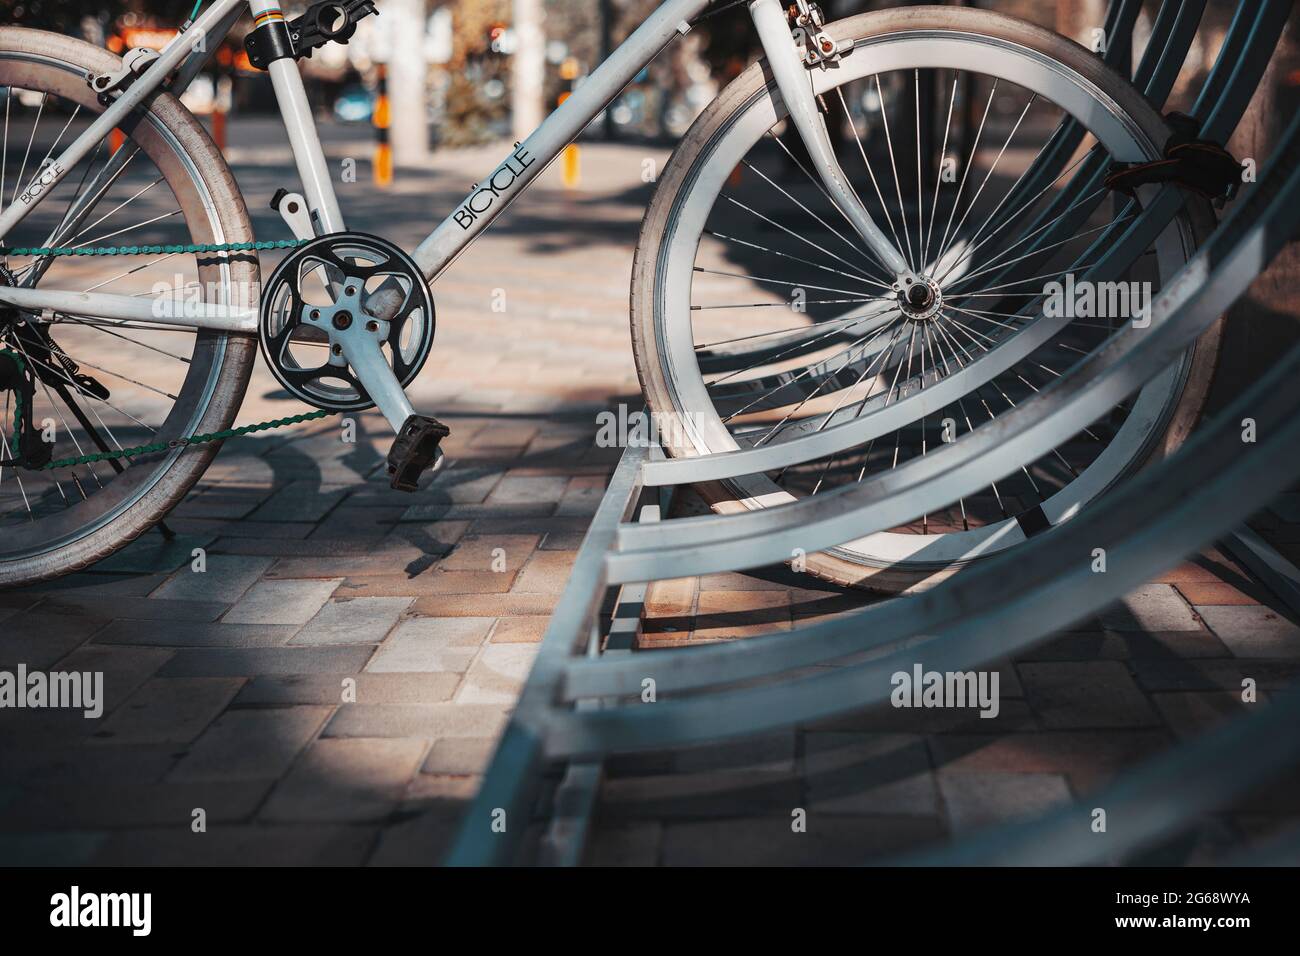 Locked bicycle at bicycle parking . Transport, storage and safety concept . Close up view Stock Photo